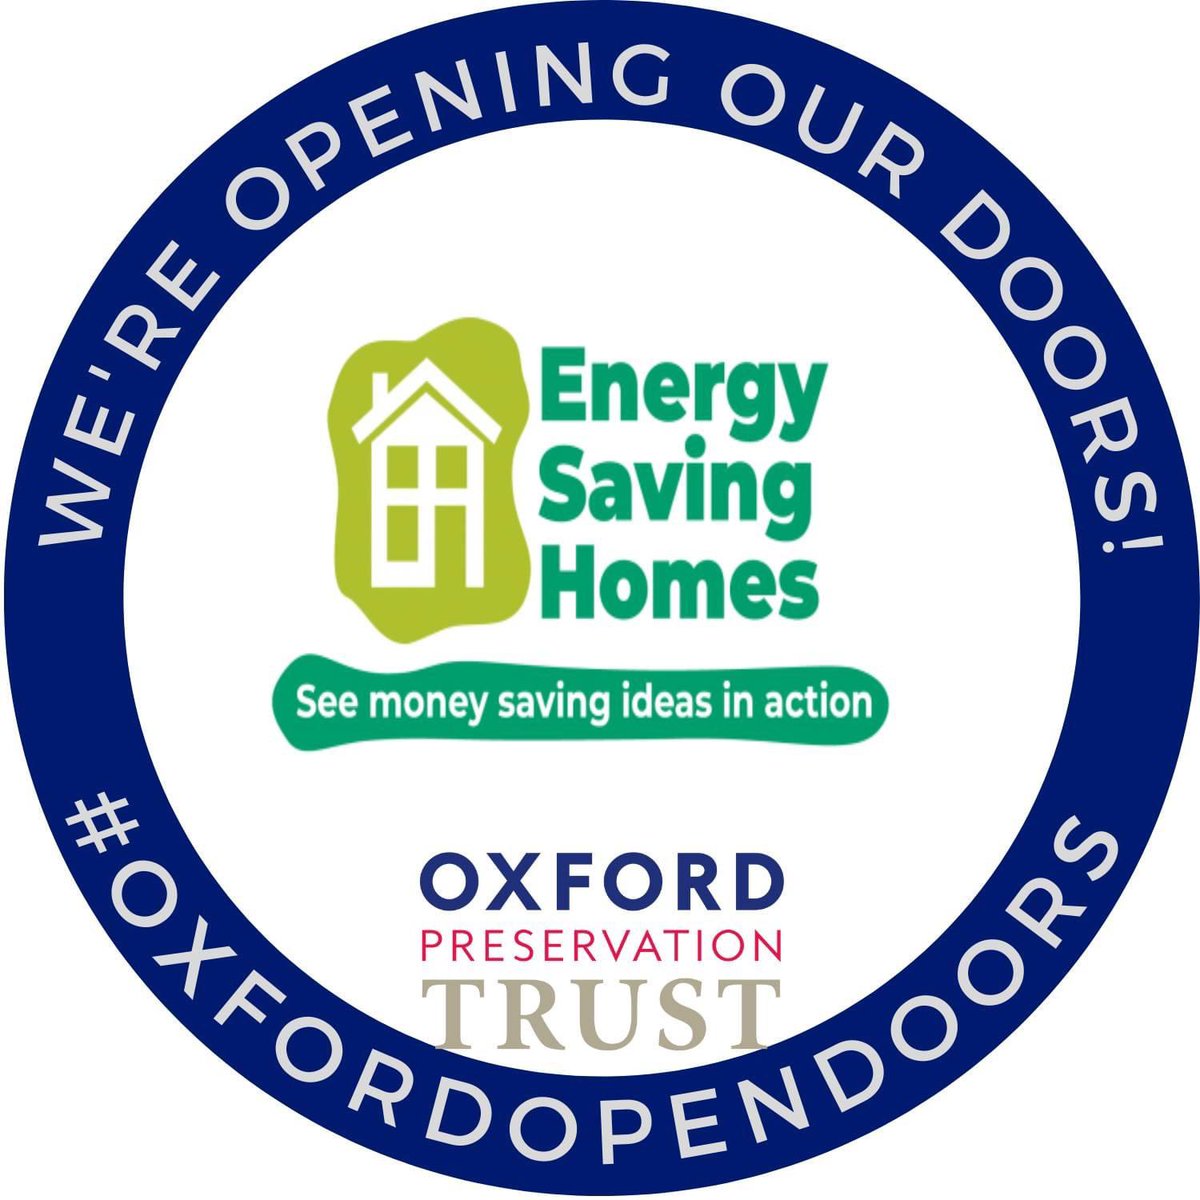 Are you thinking of improving your home? You can now talk to someone who’s been there, done that and got the T-shirt. Energy Saving Homes is happening again during #OxfordOpenDoors, 9/10 September. 

oxfordpreservation.org.uk/news/energy-sa…